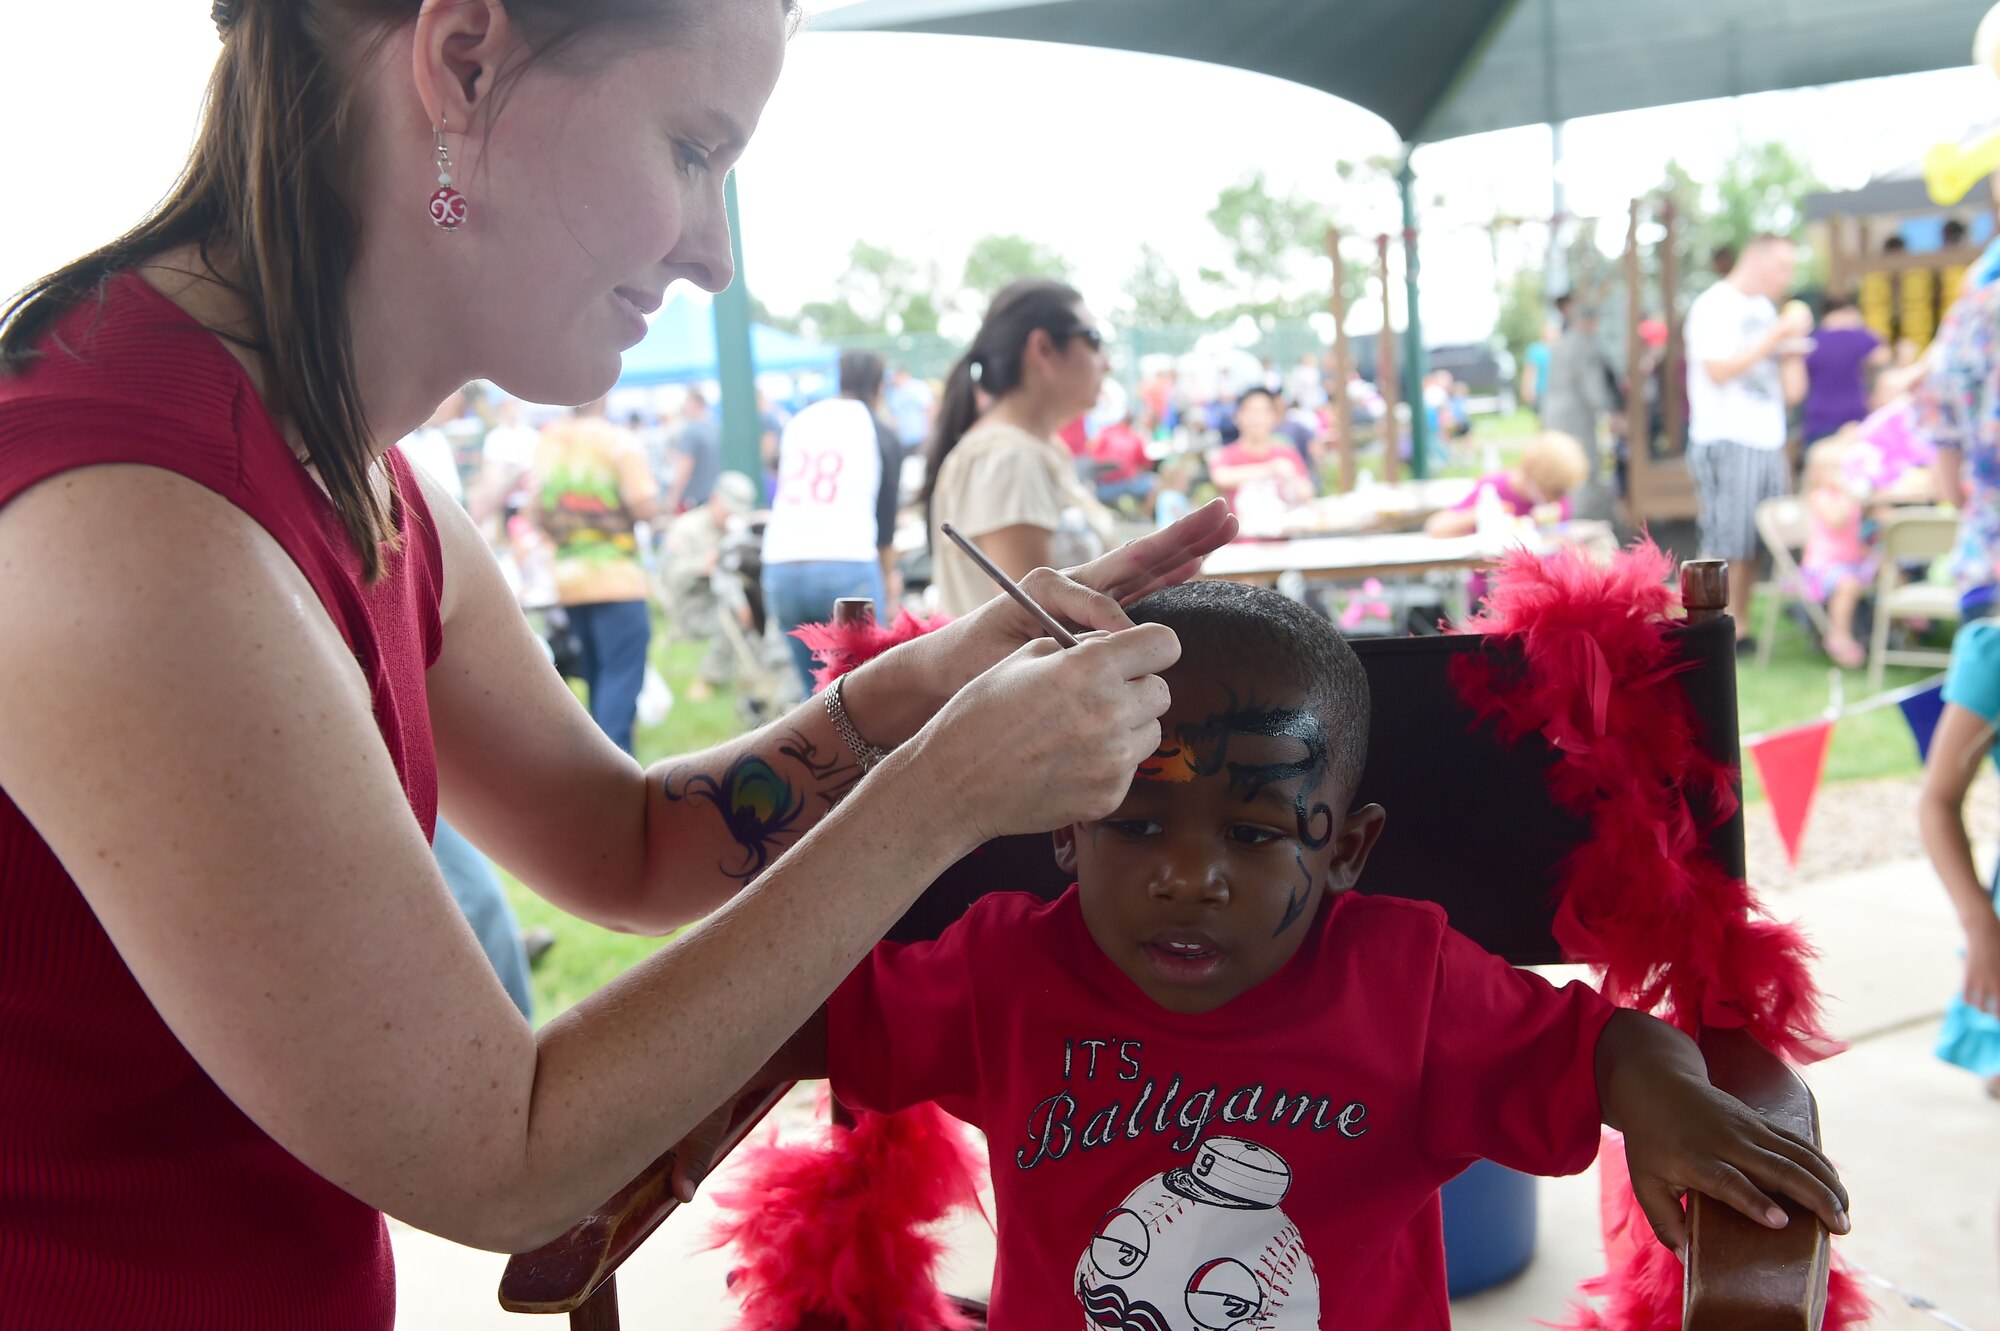 A child gets his face painted during FunFest July 24, 2015, at Buckley Air Force Base, Colo. FunFest is an annual base-wide event that includes family-friendly games and activities, community involvement and local business sponsors. (U.S. Air Force photo by Airman 1st Class Luke W. Nowakowski/Released)